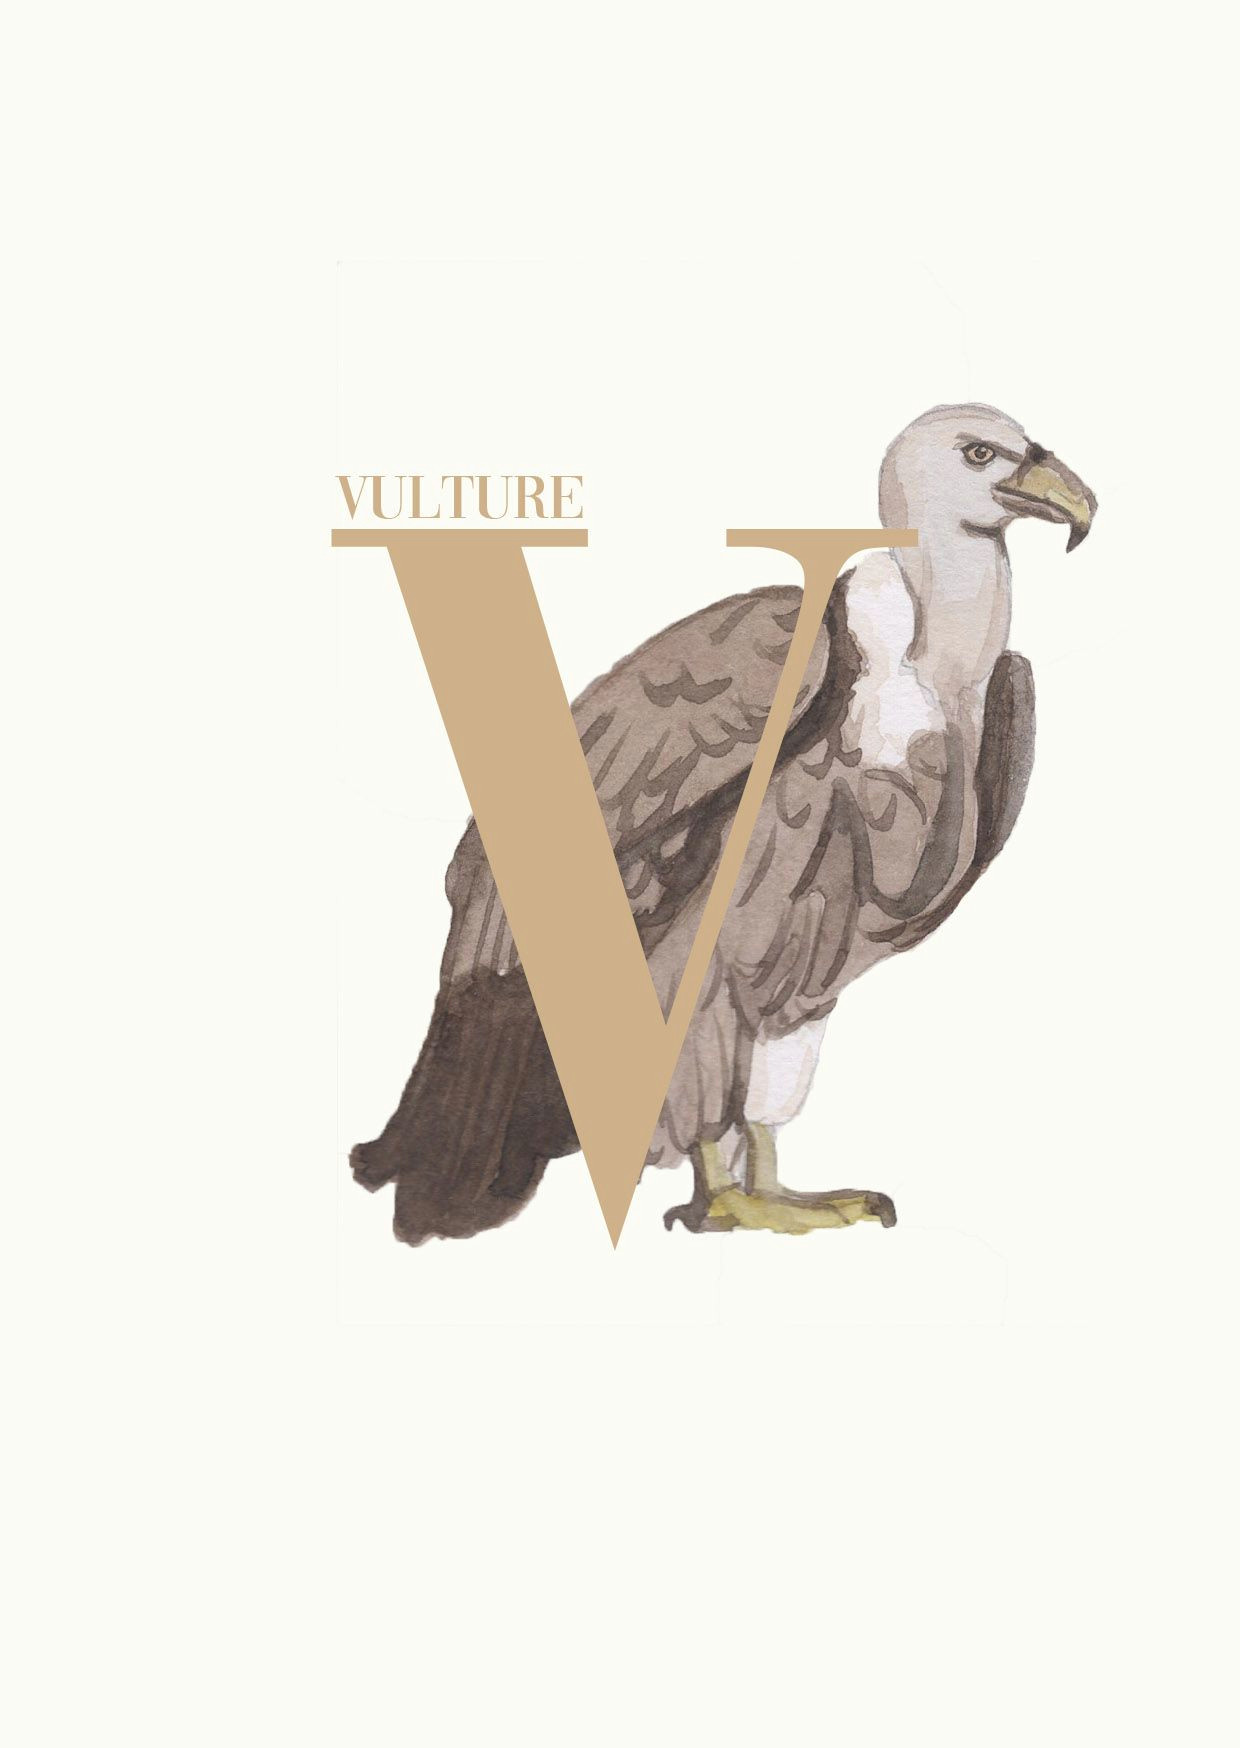 Cute Vulture Drawing Vulture by Paperfox V Vulture Brown Bird Portrait Illustration